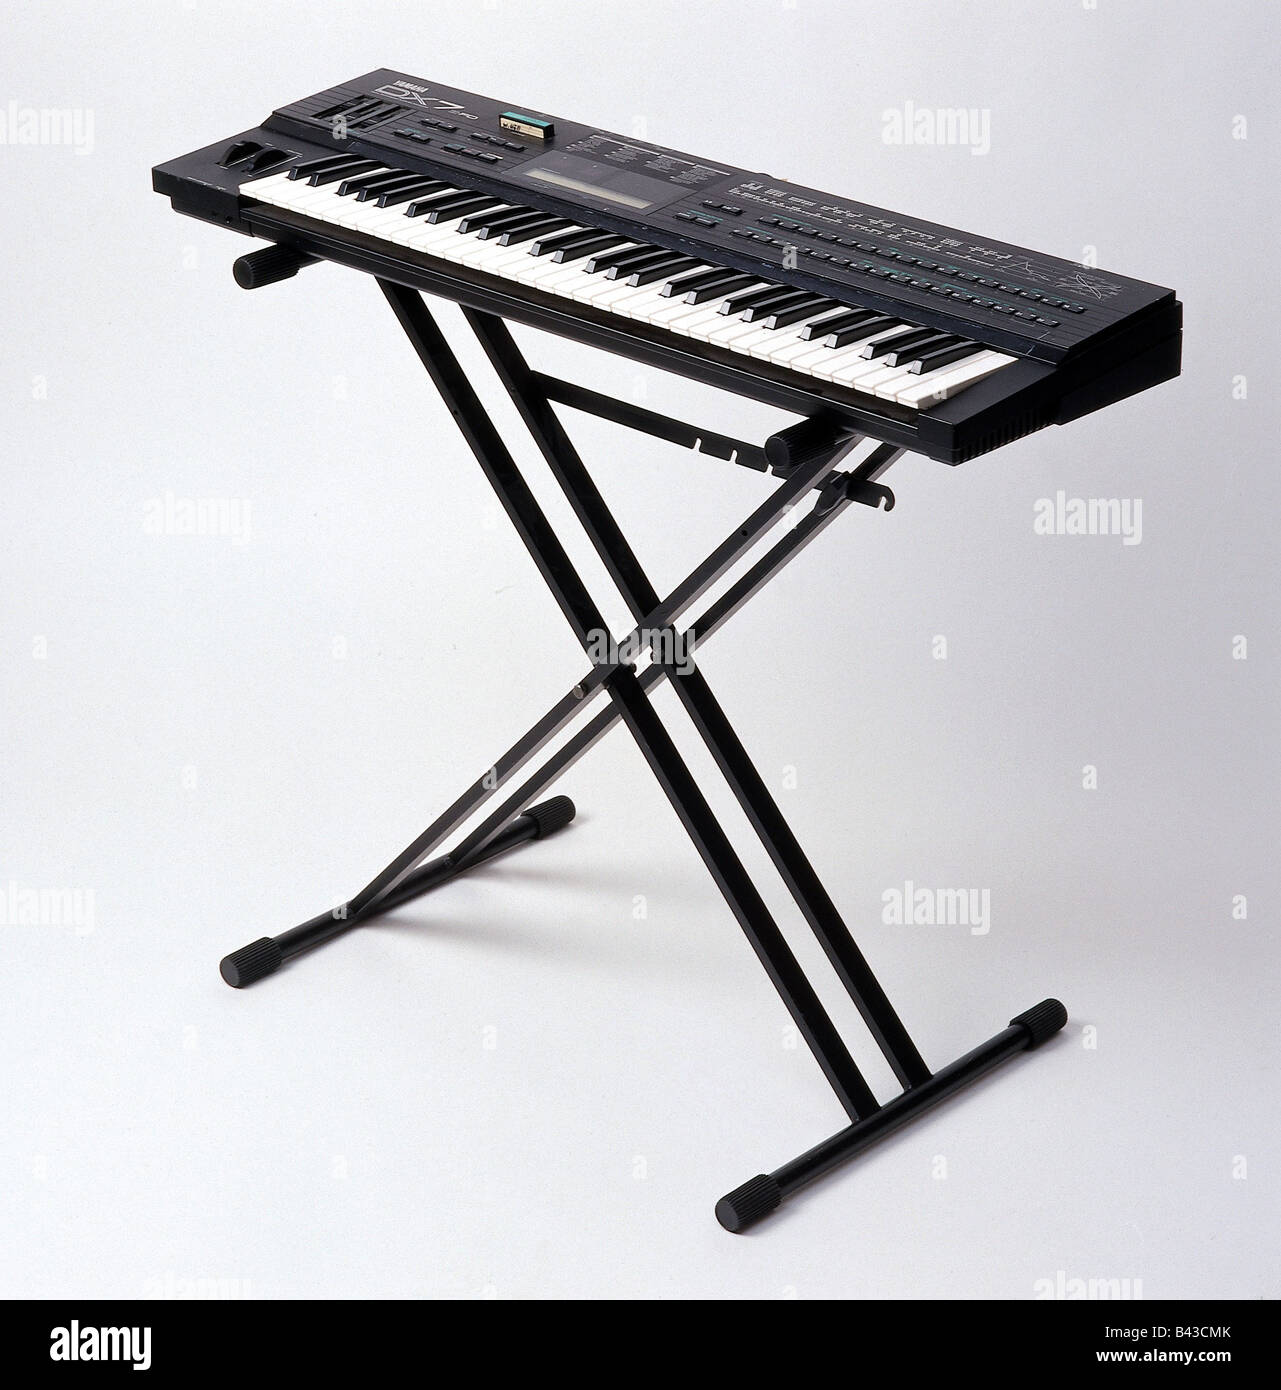 Music Instruments Synthesizer Yamaha Dx 7 Additional Rights Clearance Info Not Available Stock Photo Alamy